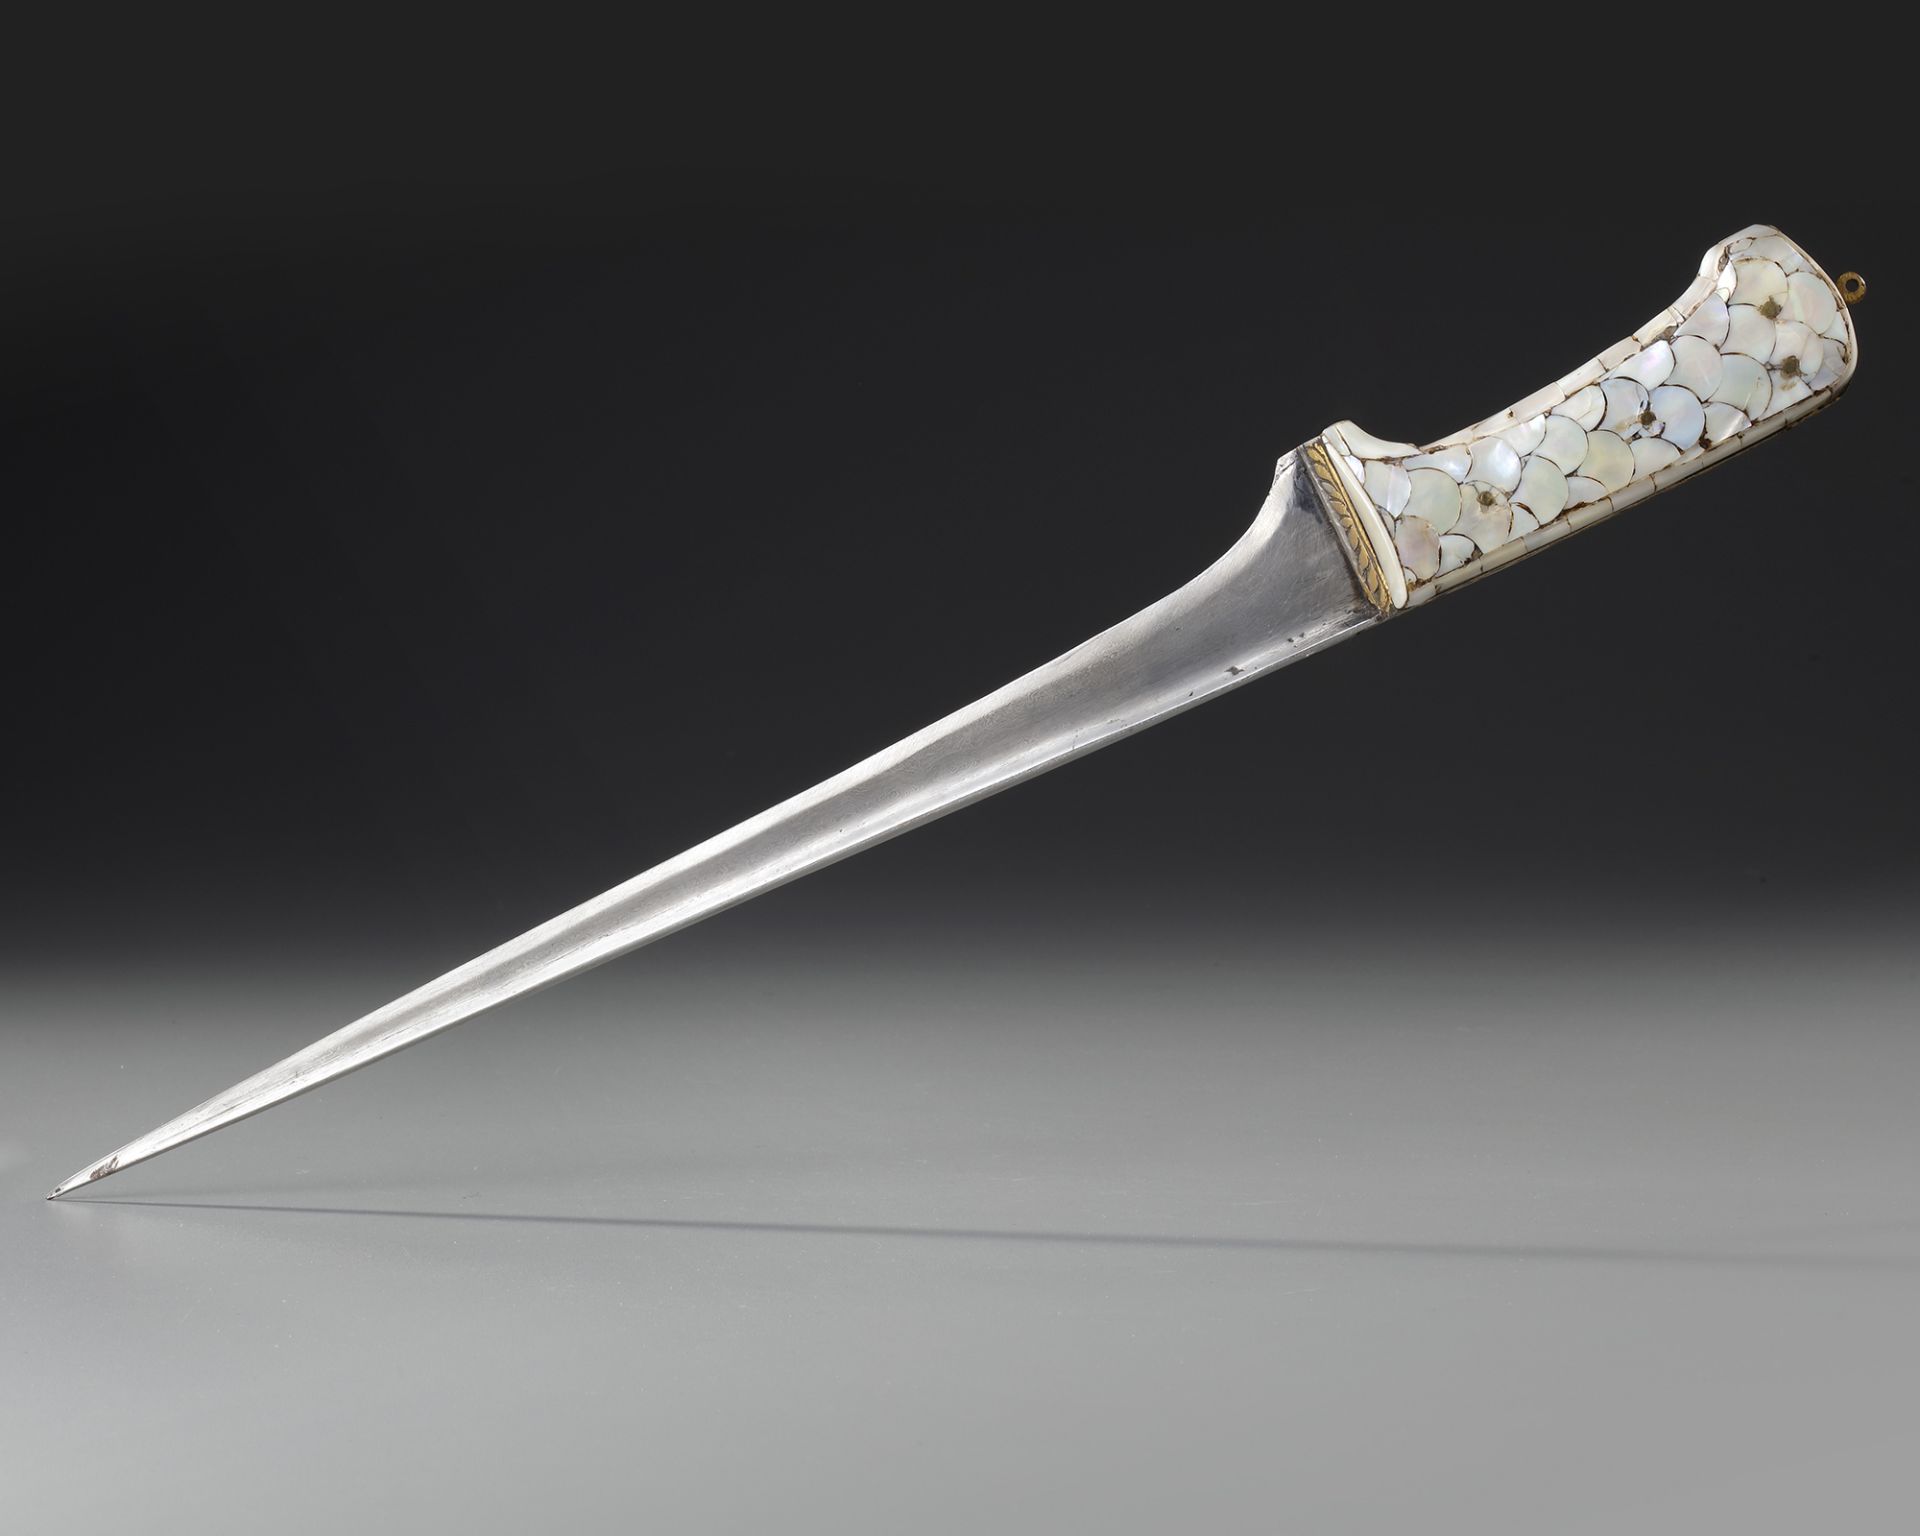 A MOTHER-OF-PEARL HILTED DAGGER (PESHKABZ), INDIA, GUJARAT, 18TH CENTURY - Image 4 of 5